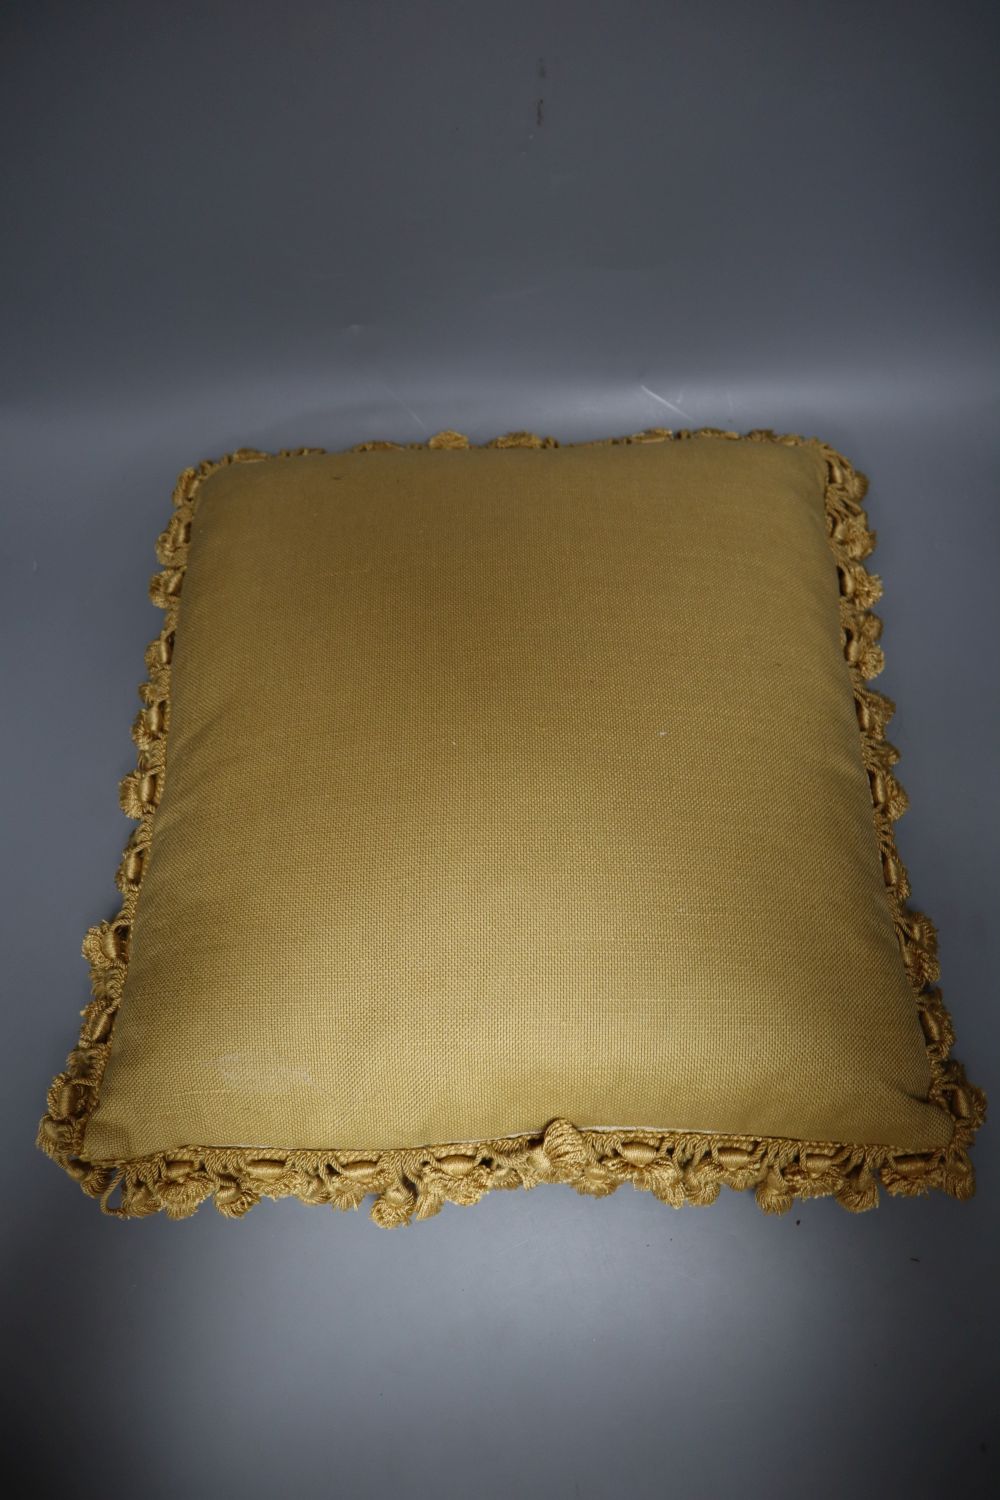 A pair of Aubusson cushions with tassel edging, 40 x 38cm